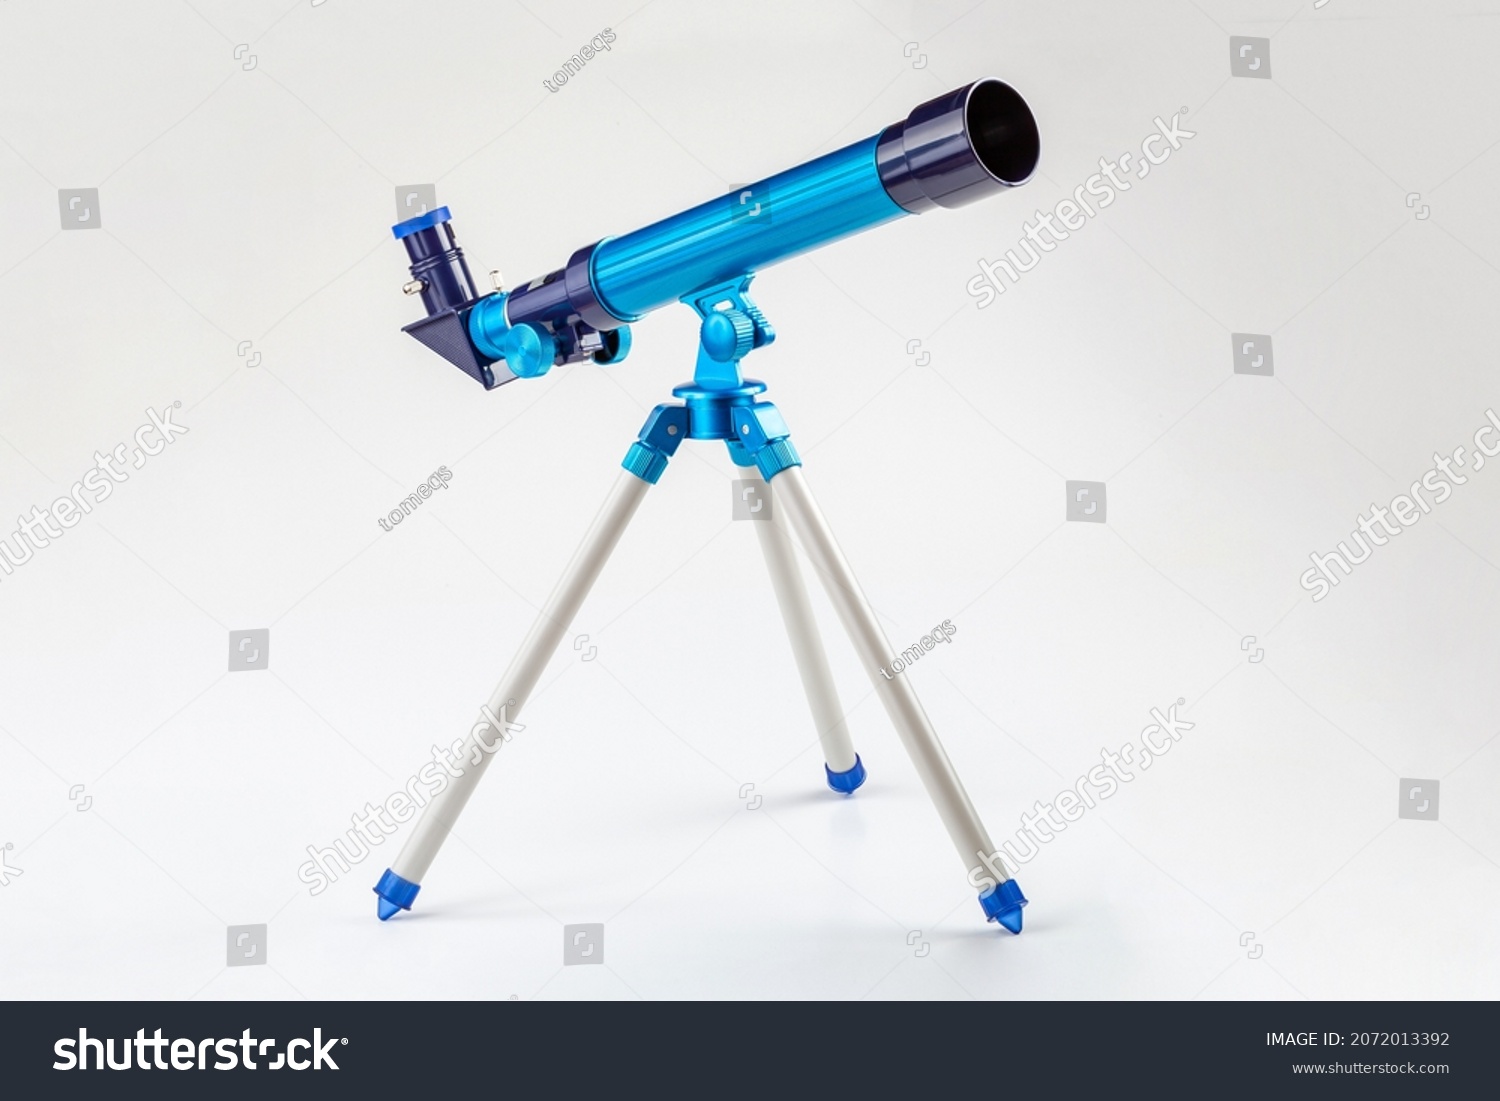 Blue toy telescope on a tripod, single object isolated on white background. Stargazing, space observation science instruments, tools for young kids, children, astronomy hobby conceptual symbol, nobody #2072013392